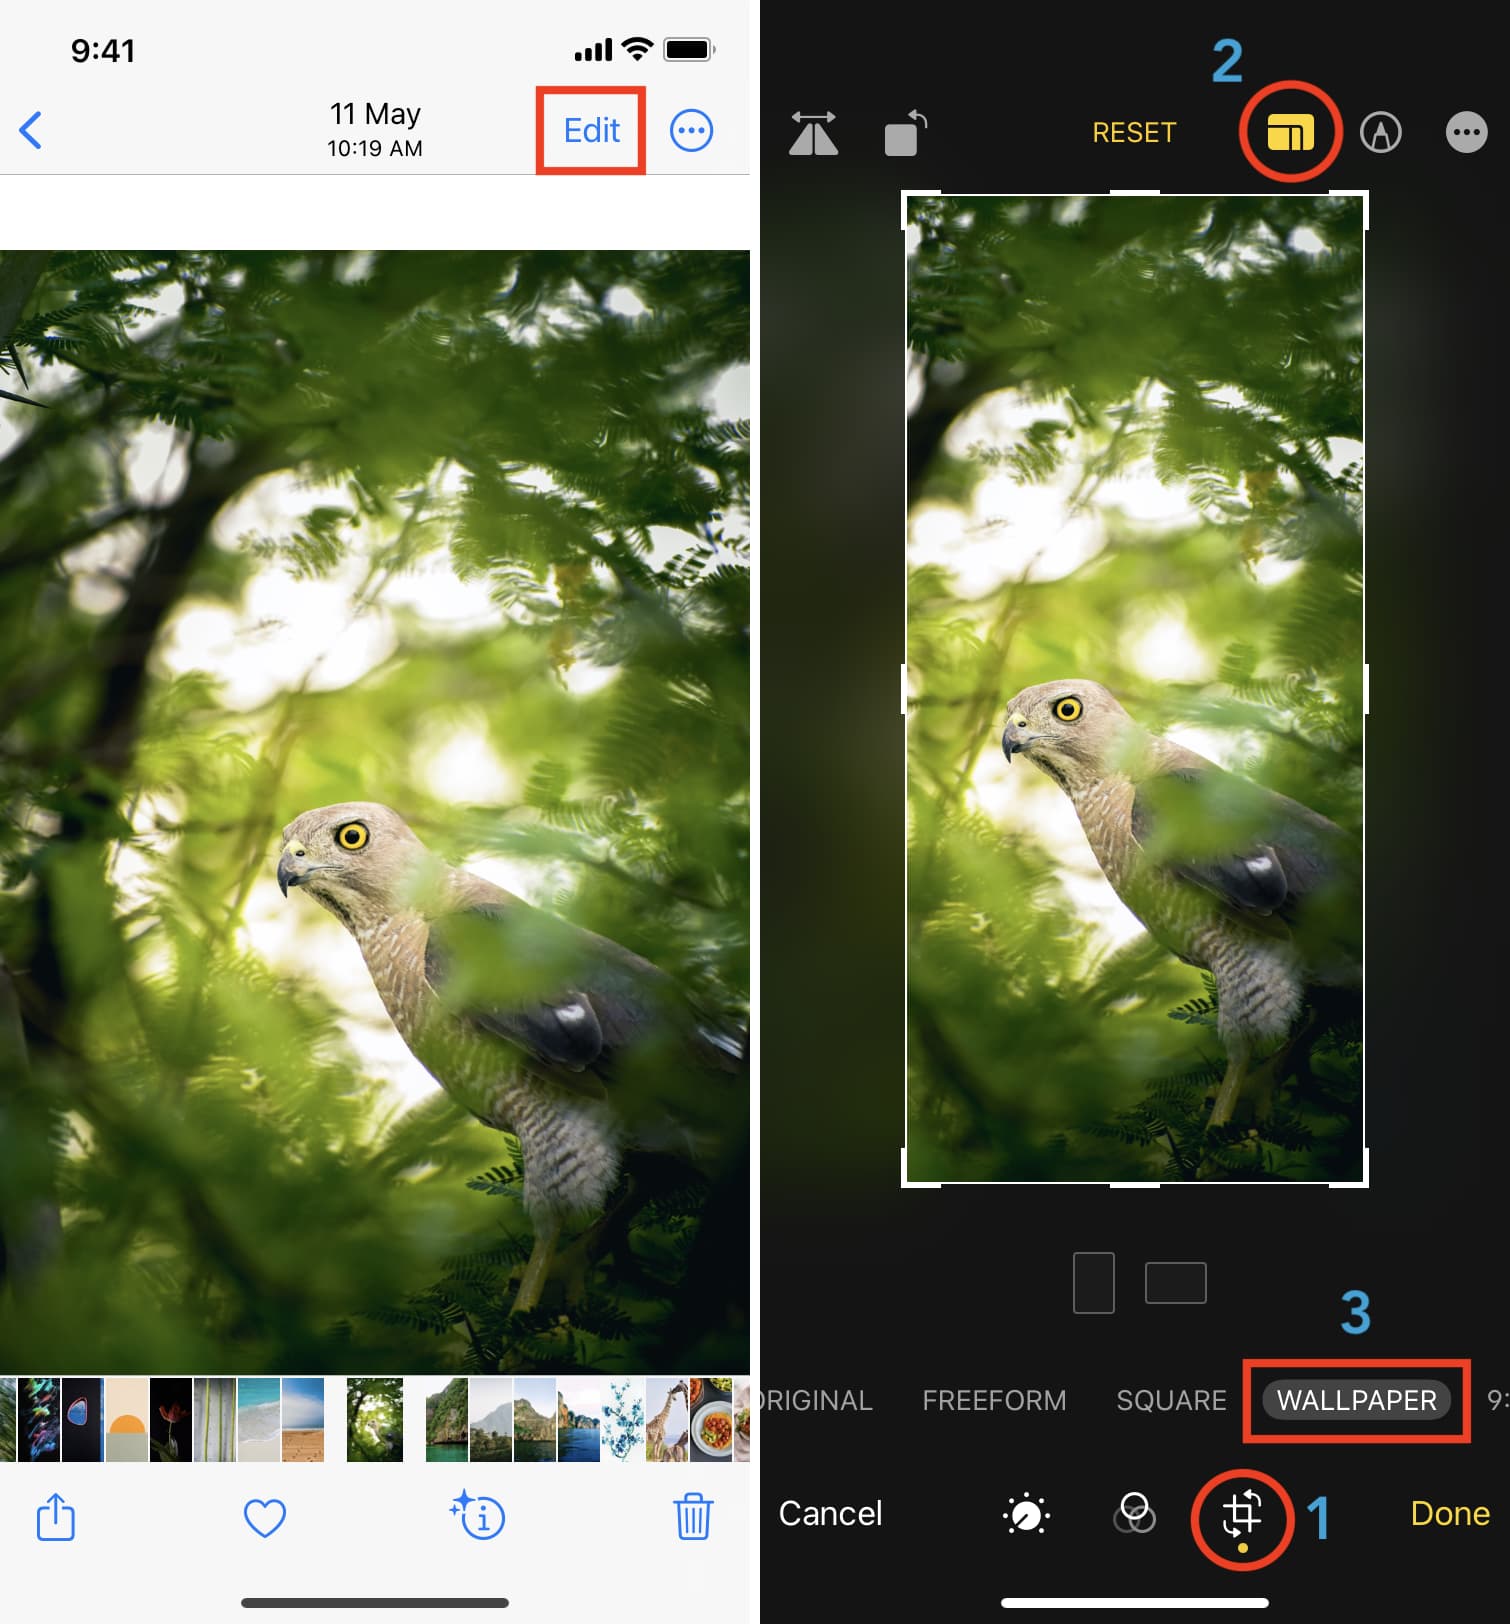 Edit image in perfect wallpaper dimensions in iPhone Photos app on iOS 16